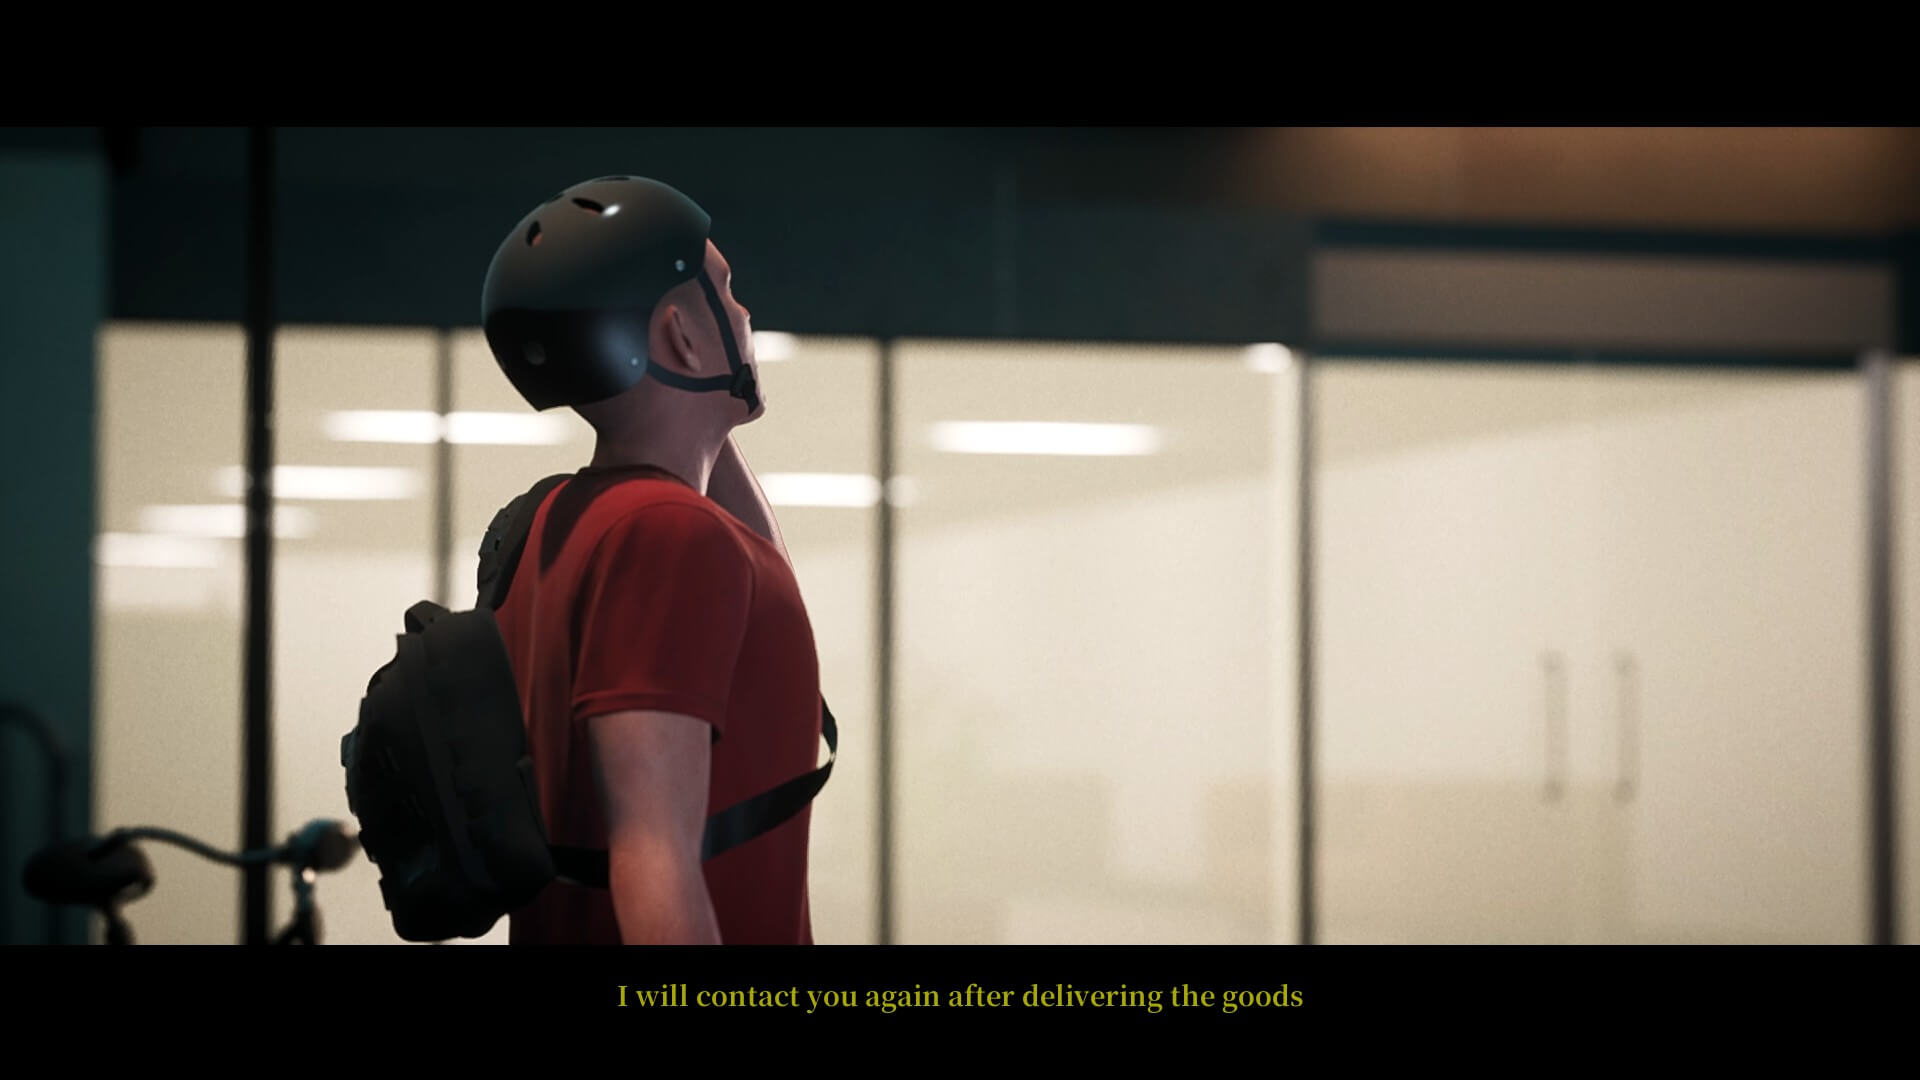 Our main protagonist standing outside the a building. He is wearing a bicycle Helmet and red t-shirt. The text below belongs to the main character and is coloured yellow.